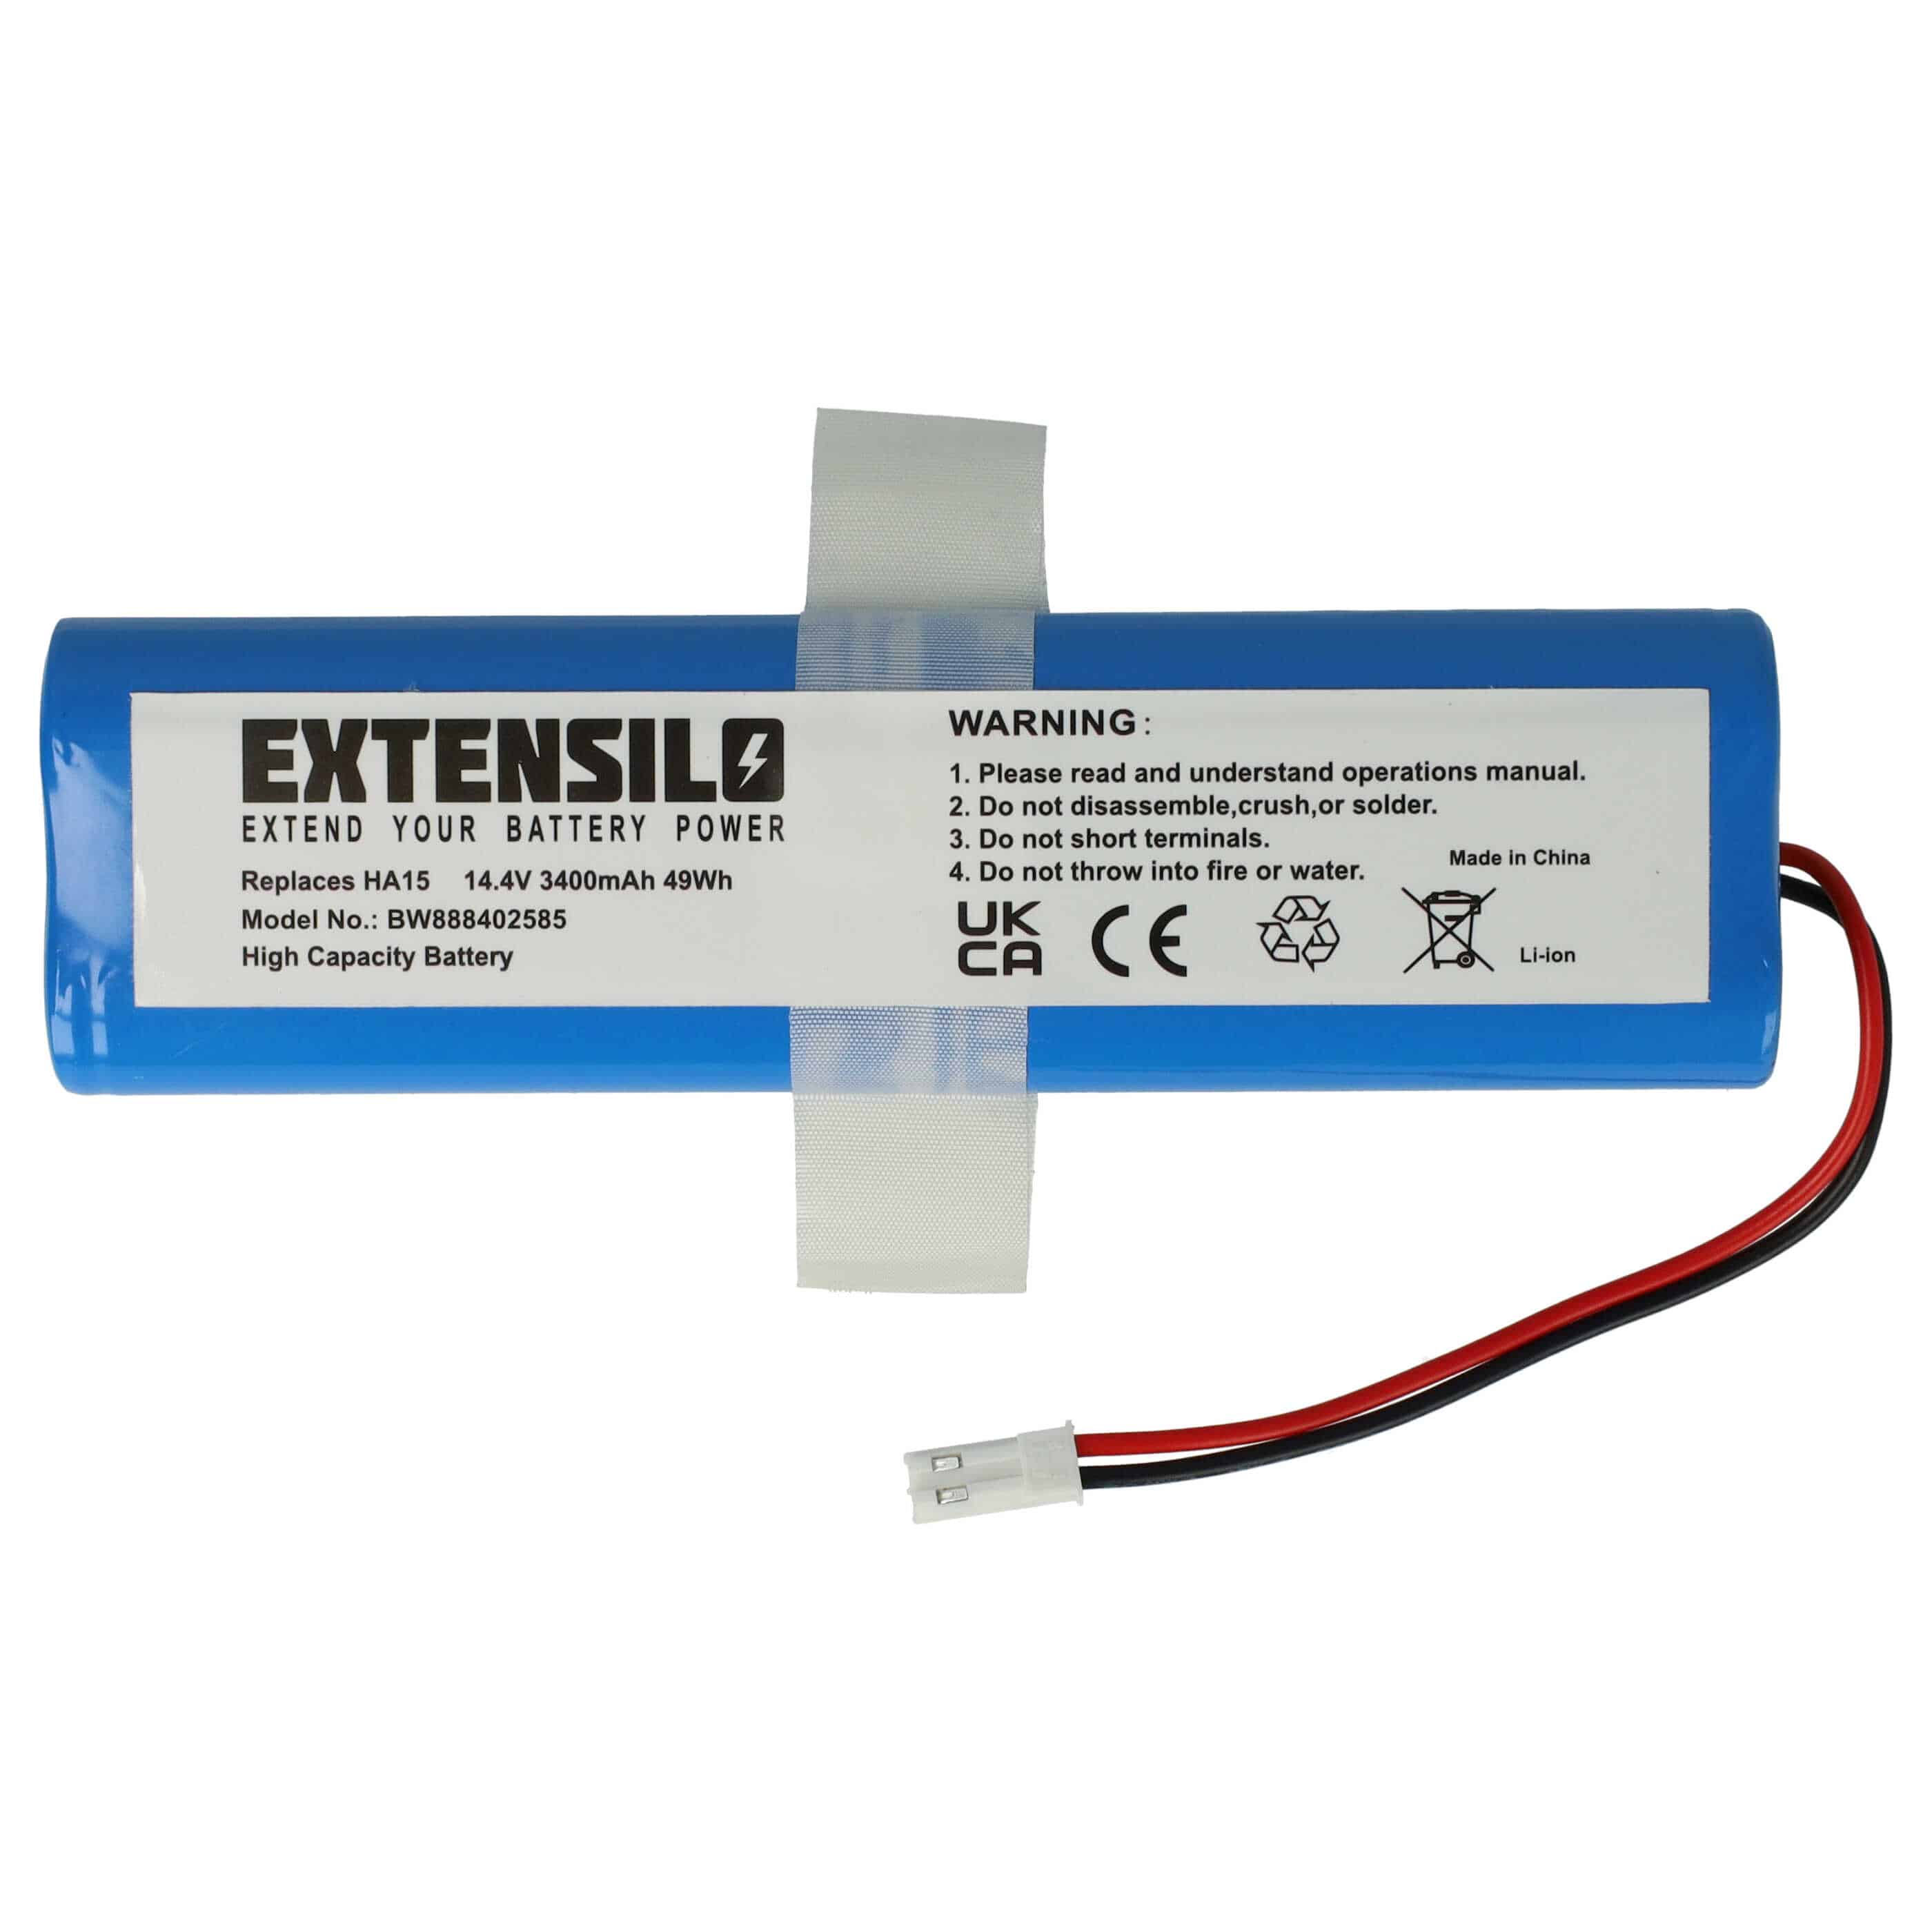 Battery Replacement for iLife Ay-18650B4, 18650B4-4S1P-AGX-2, SUN-INTE-202 for - 3400mAh, 14.4V, Li-Ion